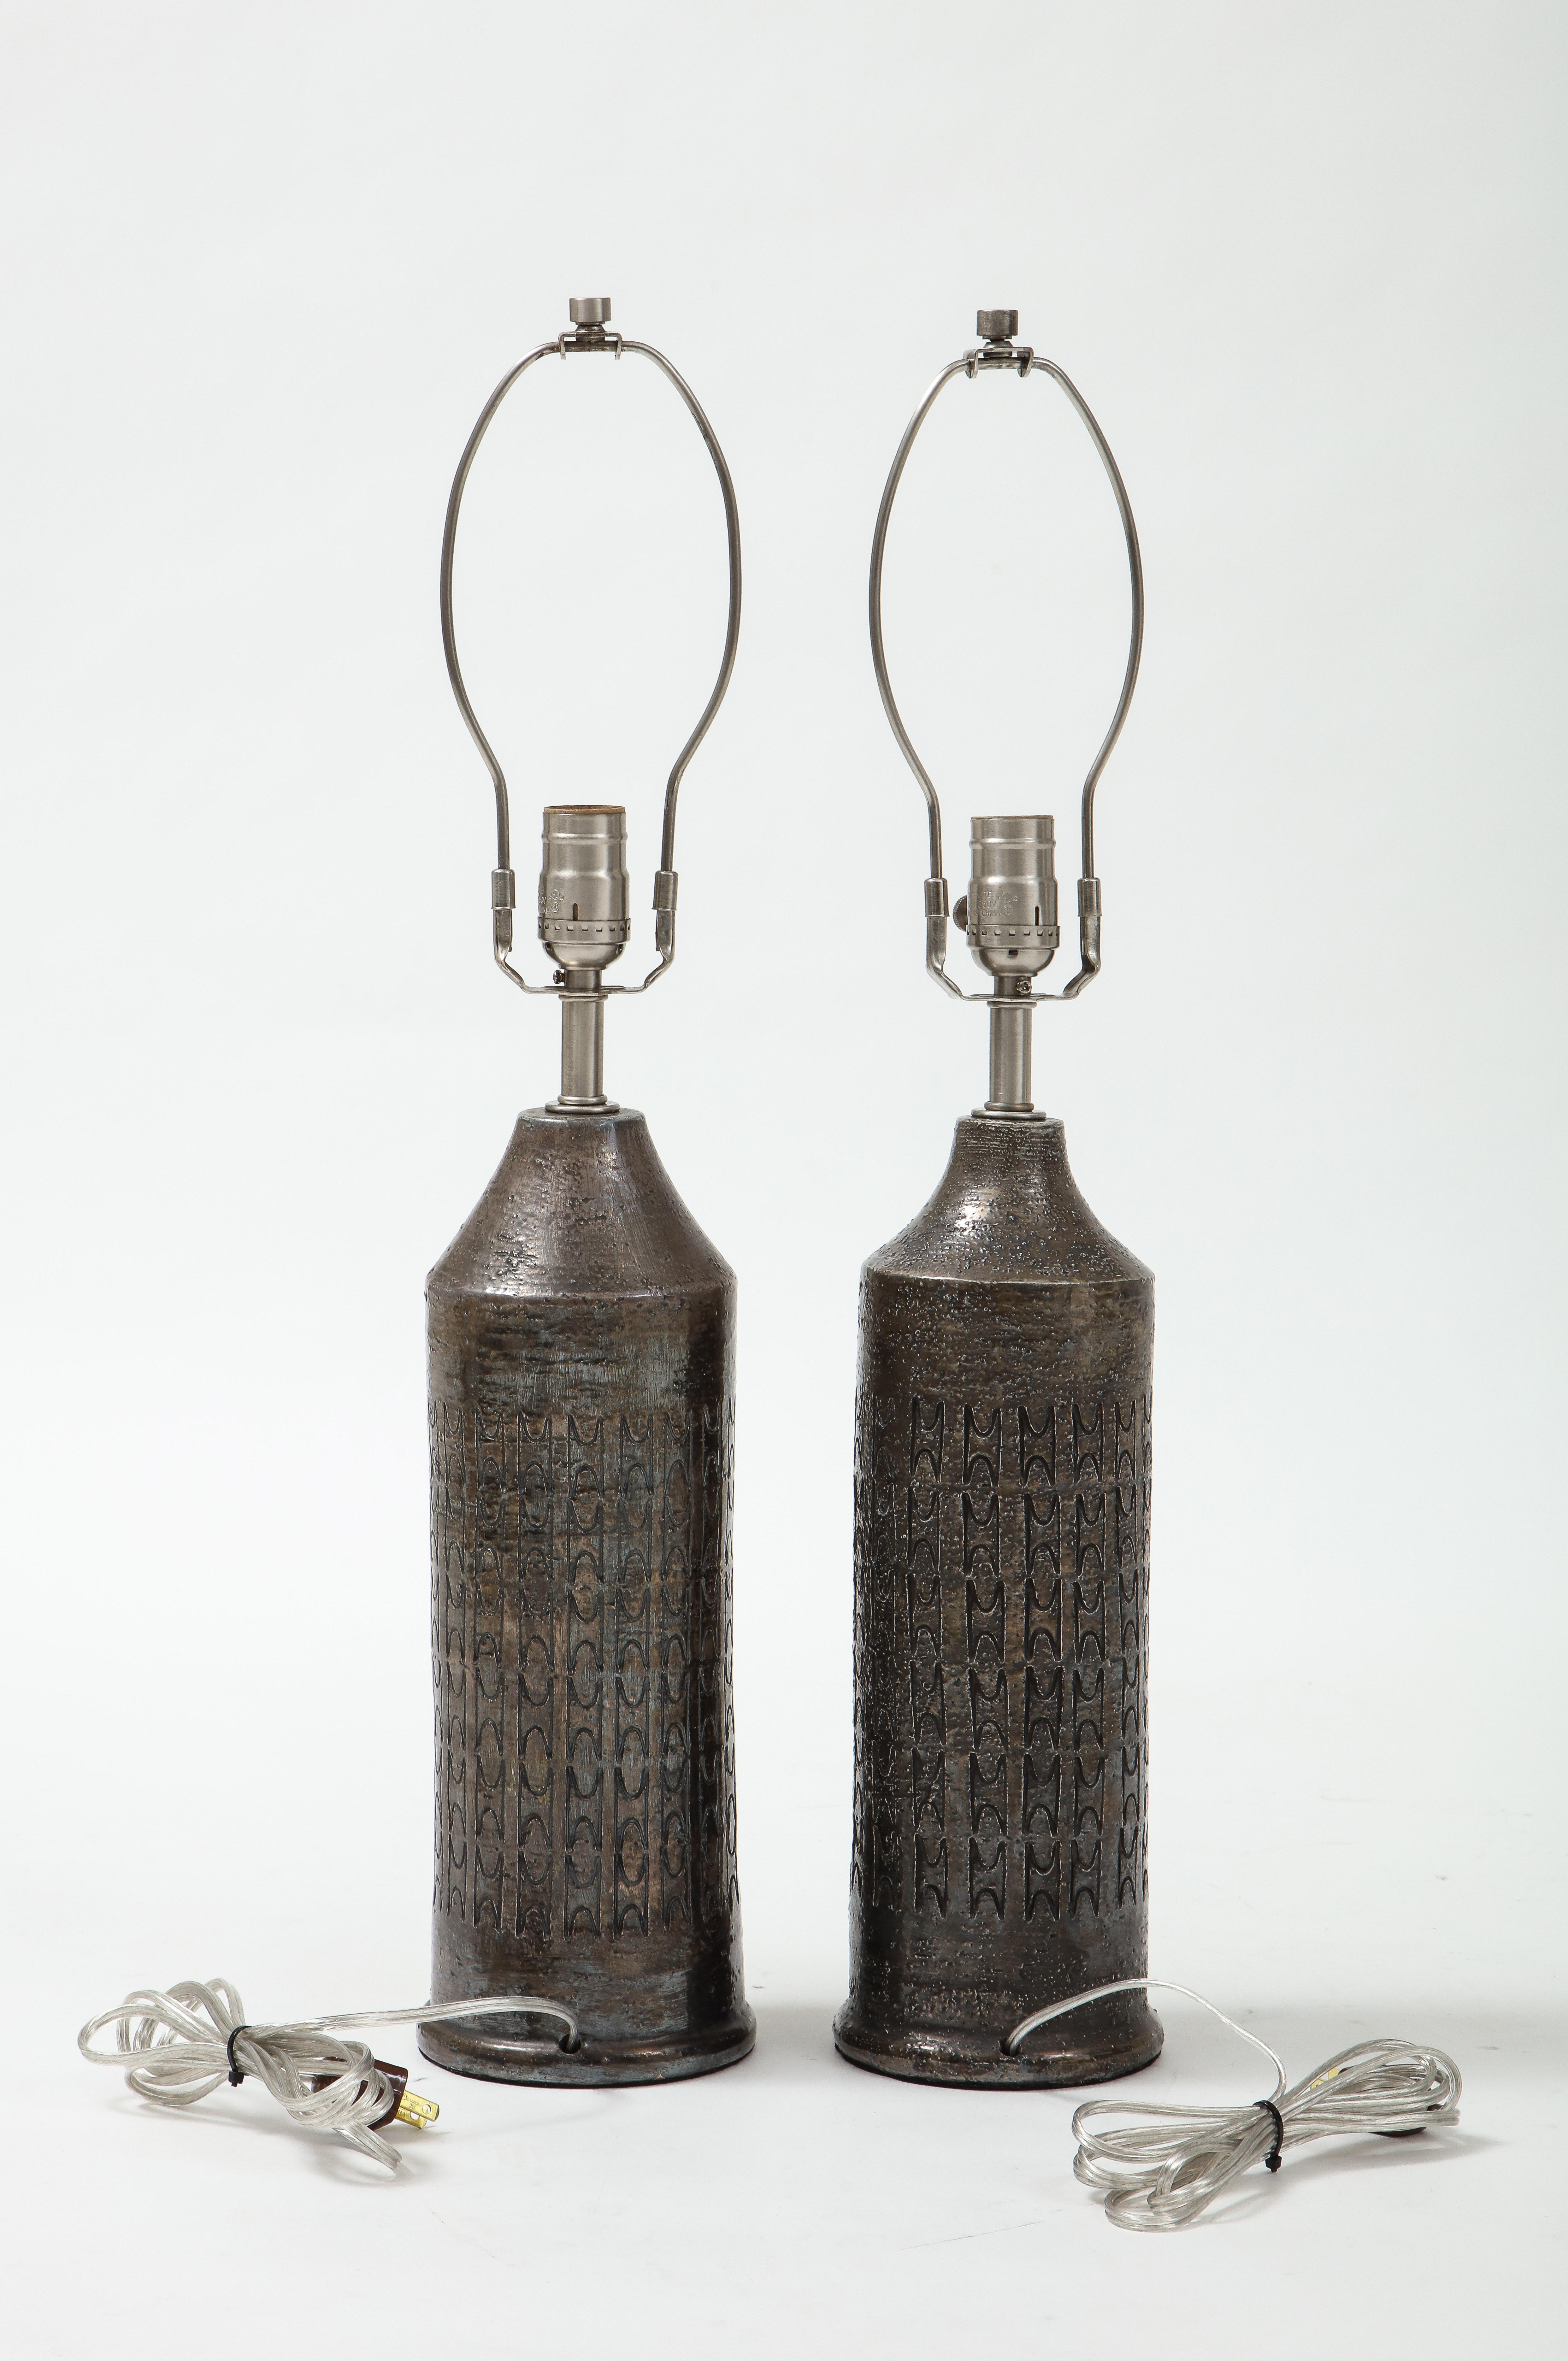 Pair of Italian hand built ceramic lamps with a sophisticated gunmetal glaze and hand inscribed chain pattern. Rewired for use in the USA, 100W max. Height listed is an overall height including harp.